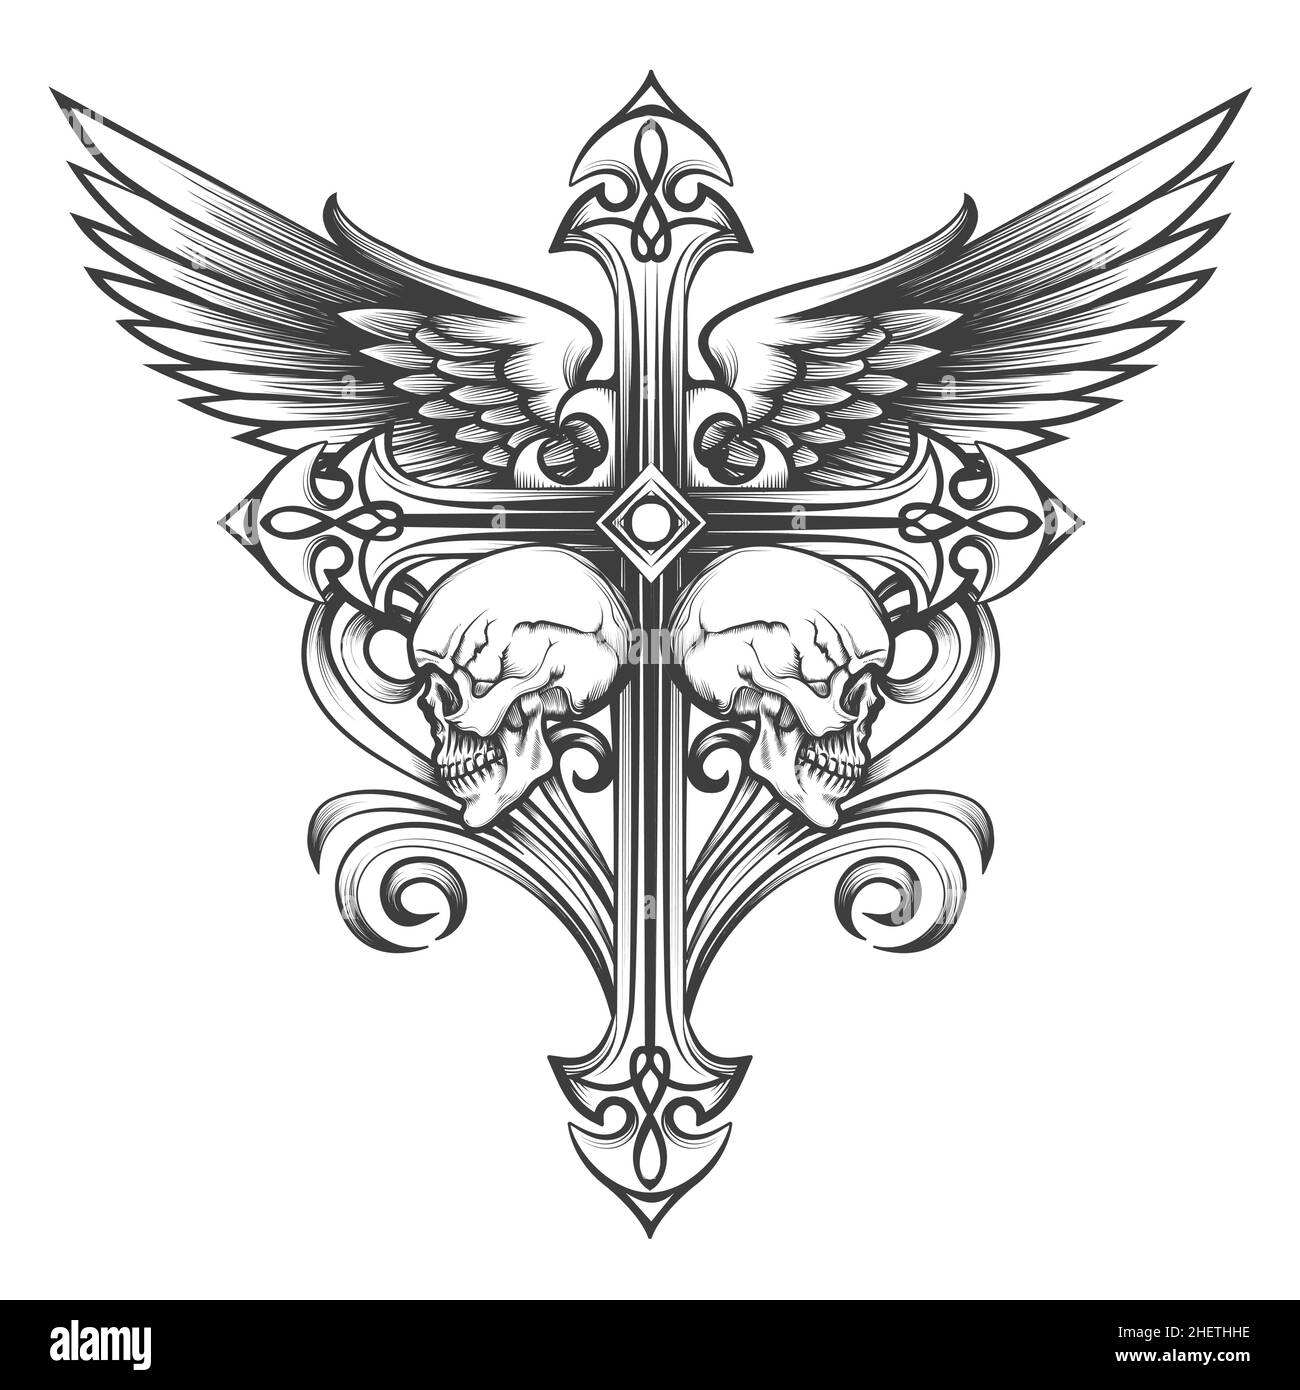 Tattoo of Cross with Wings and Skulls drawn in engraving style. Vector illustration. Stock Vector